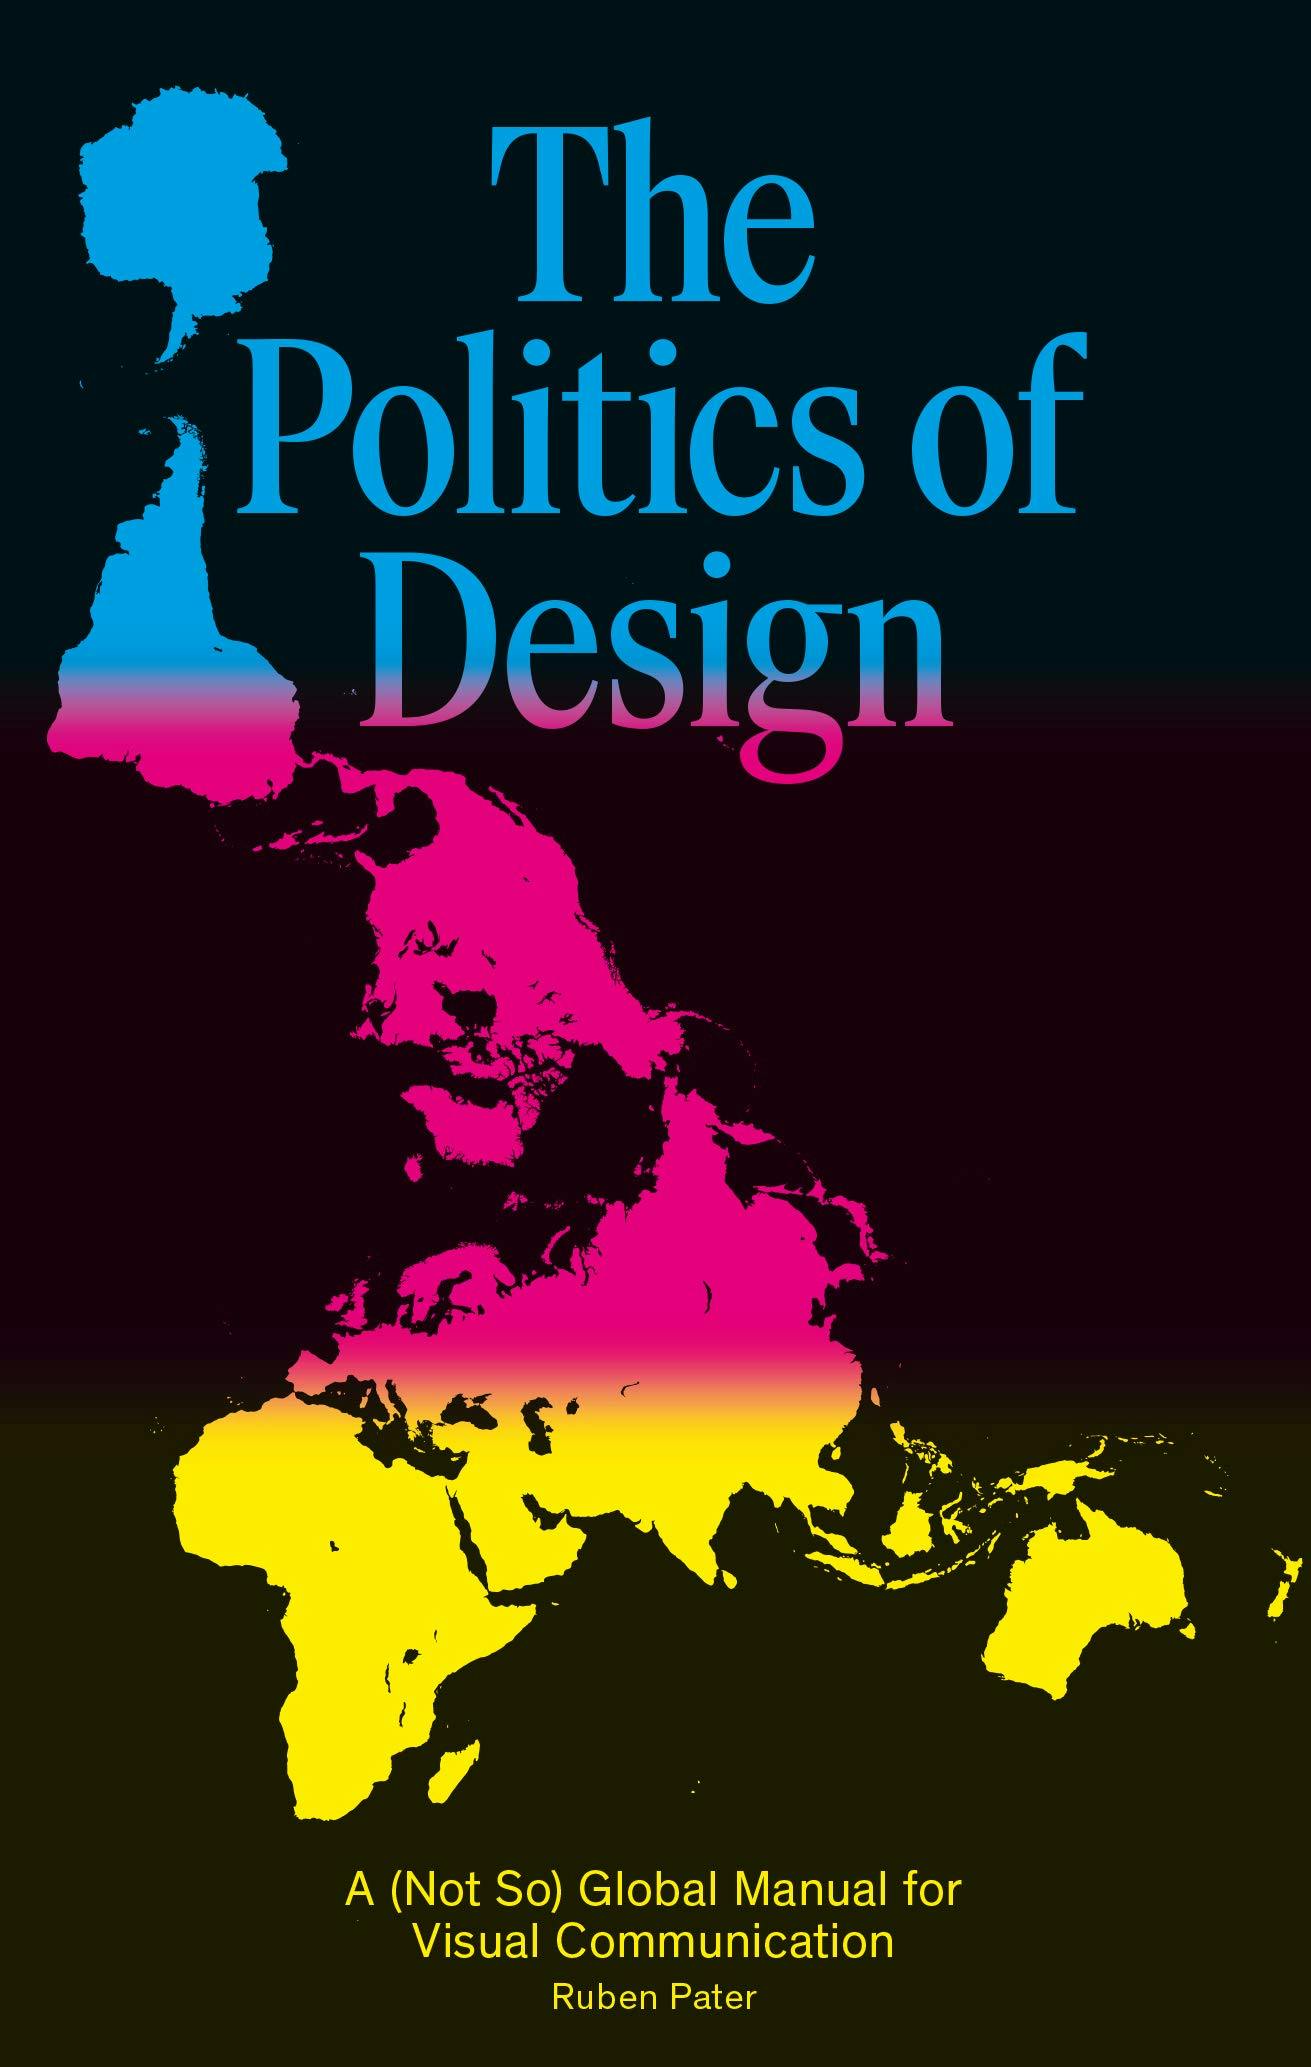 The media cover for “The Politics of Design” by Ruben Pater